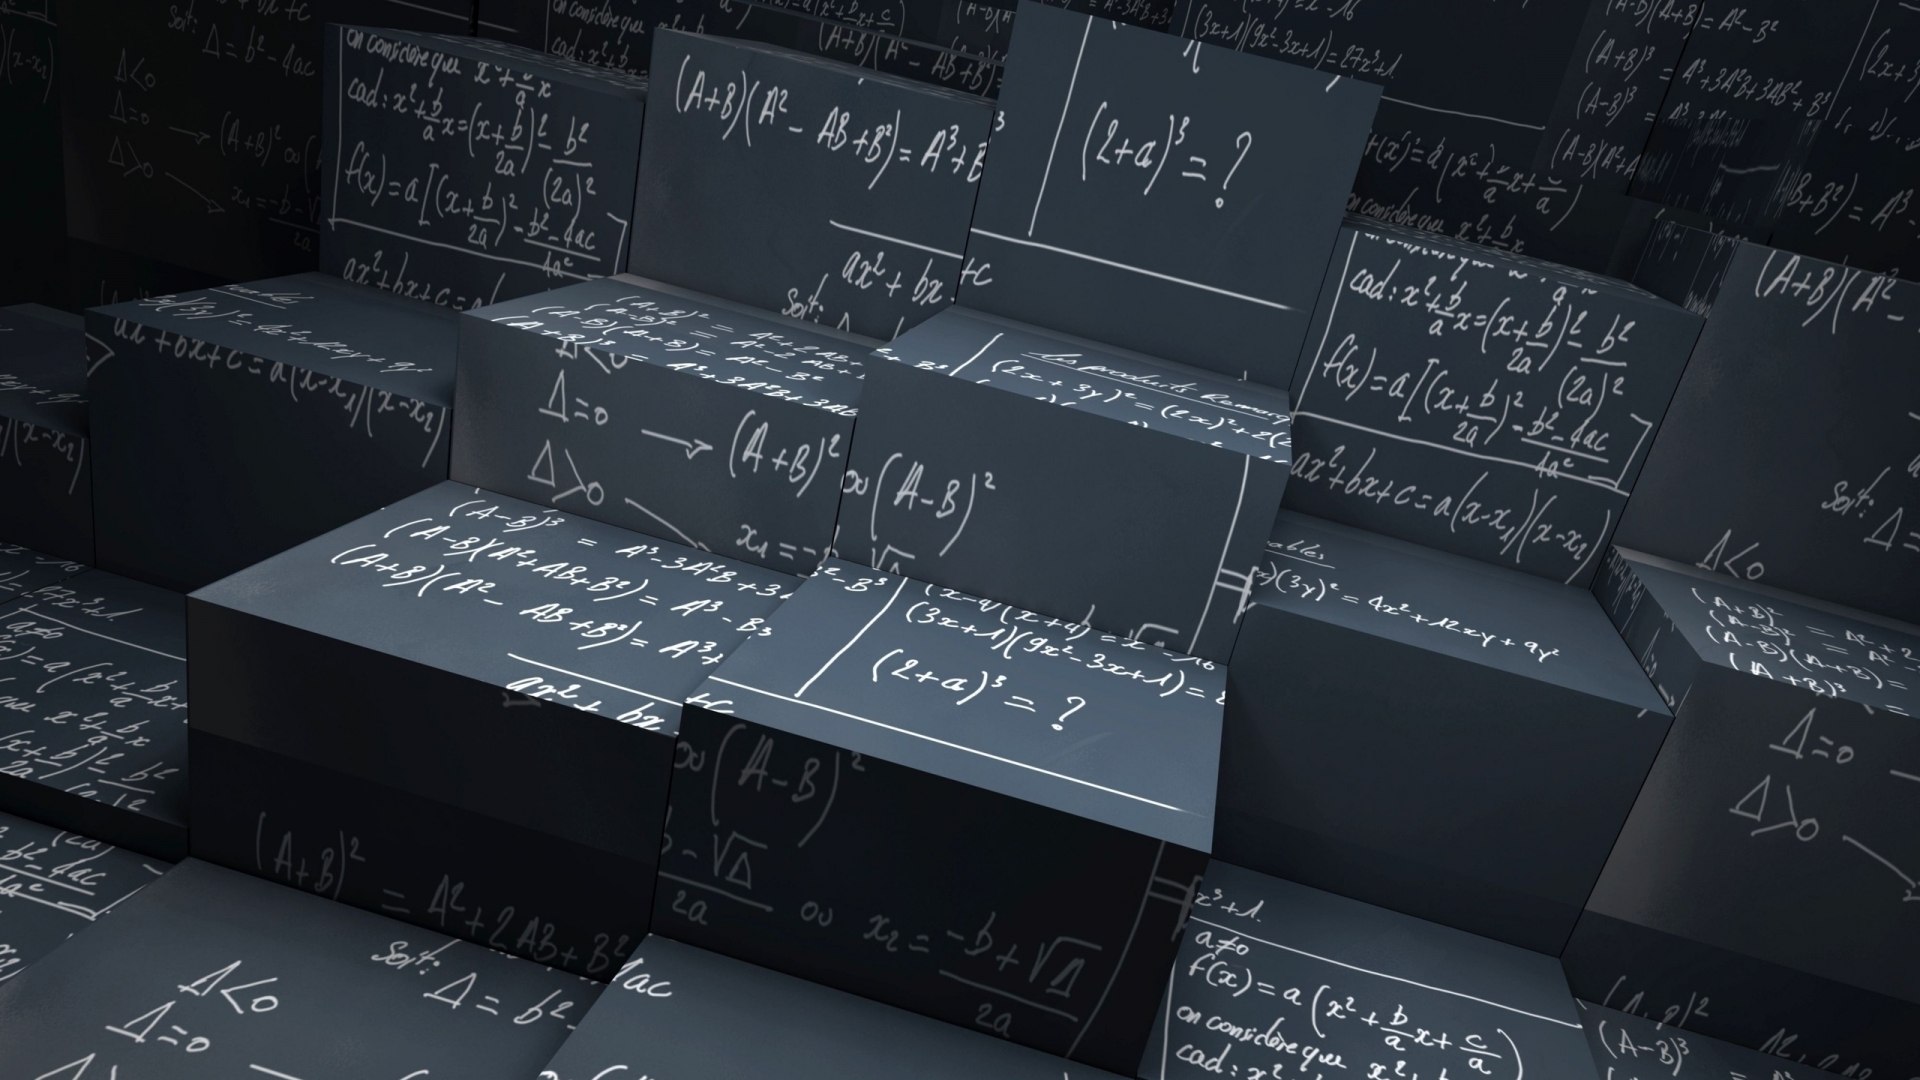 Equations for 1920 x 1080 HDTV 1080p resolution